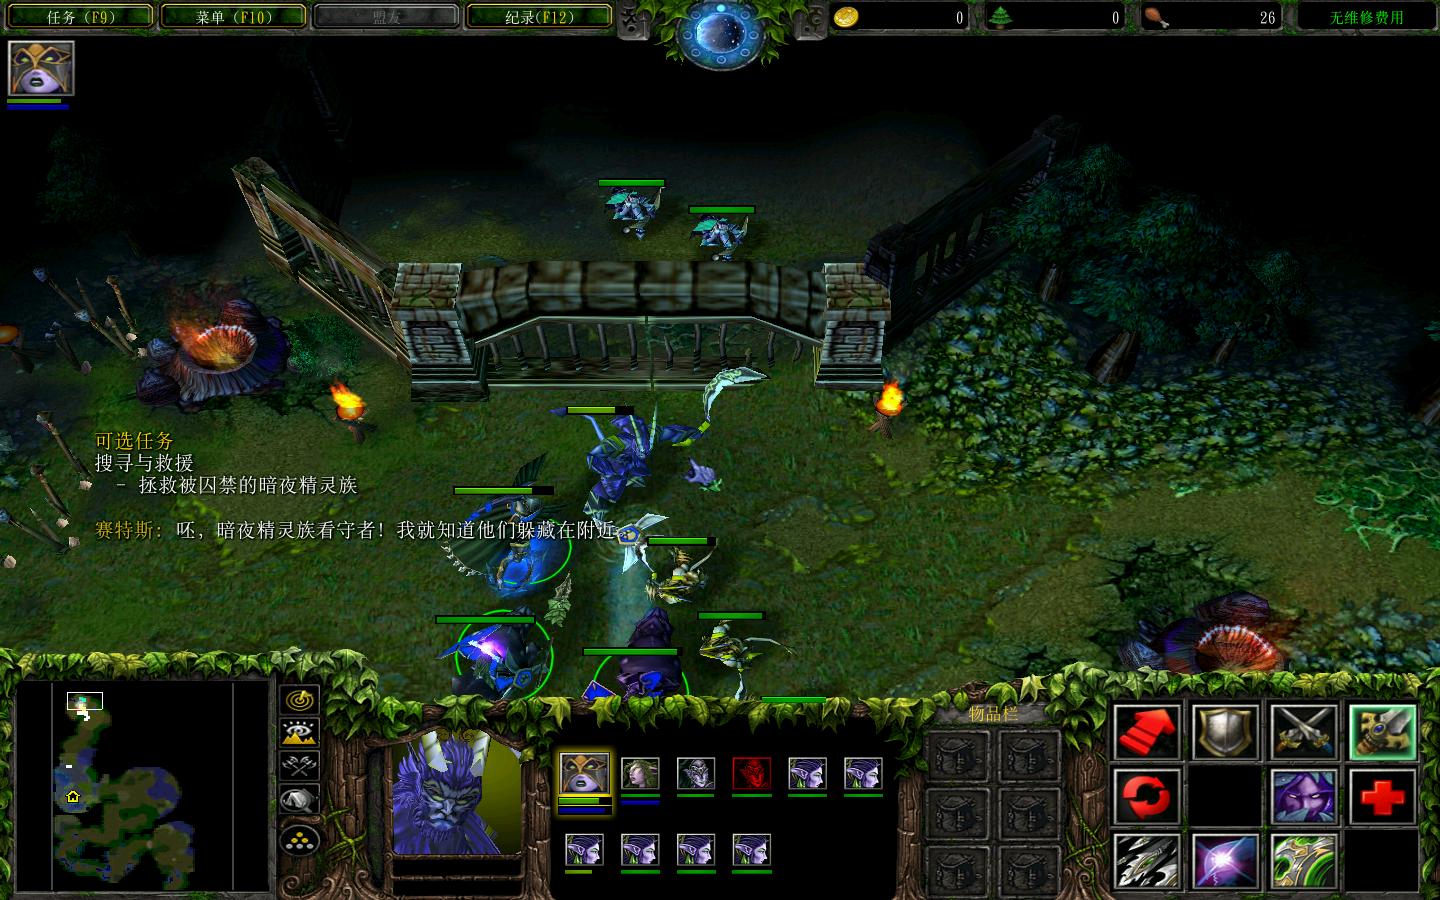 ħ3Warcraft III The Frozen Thronev1.24޾v1.0.25